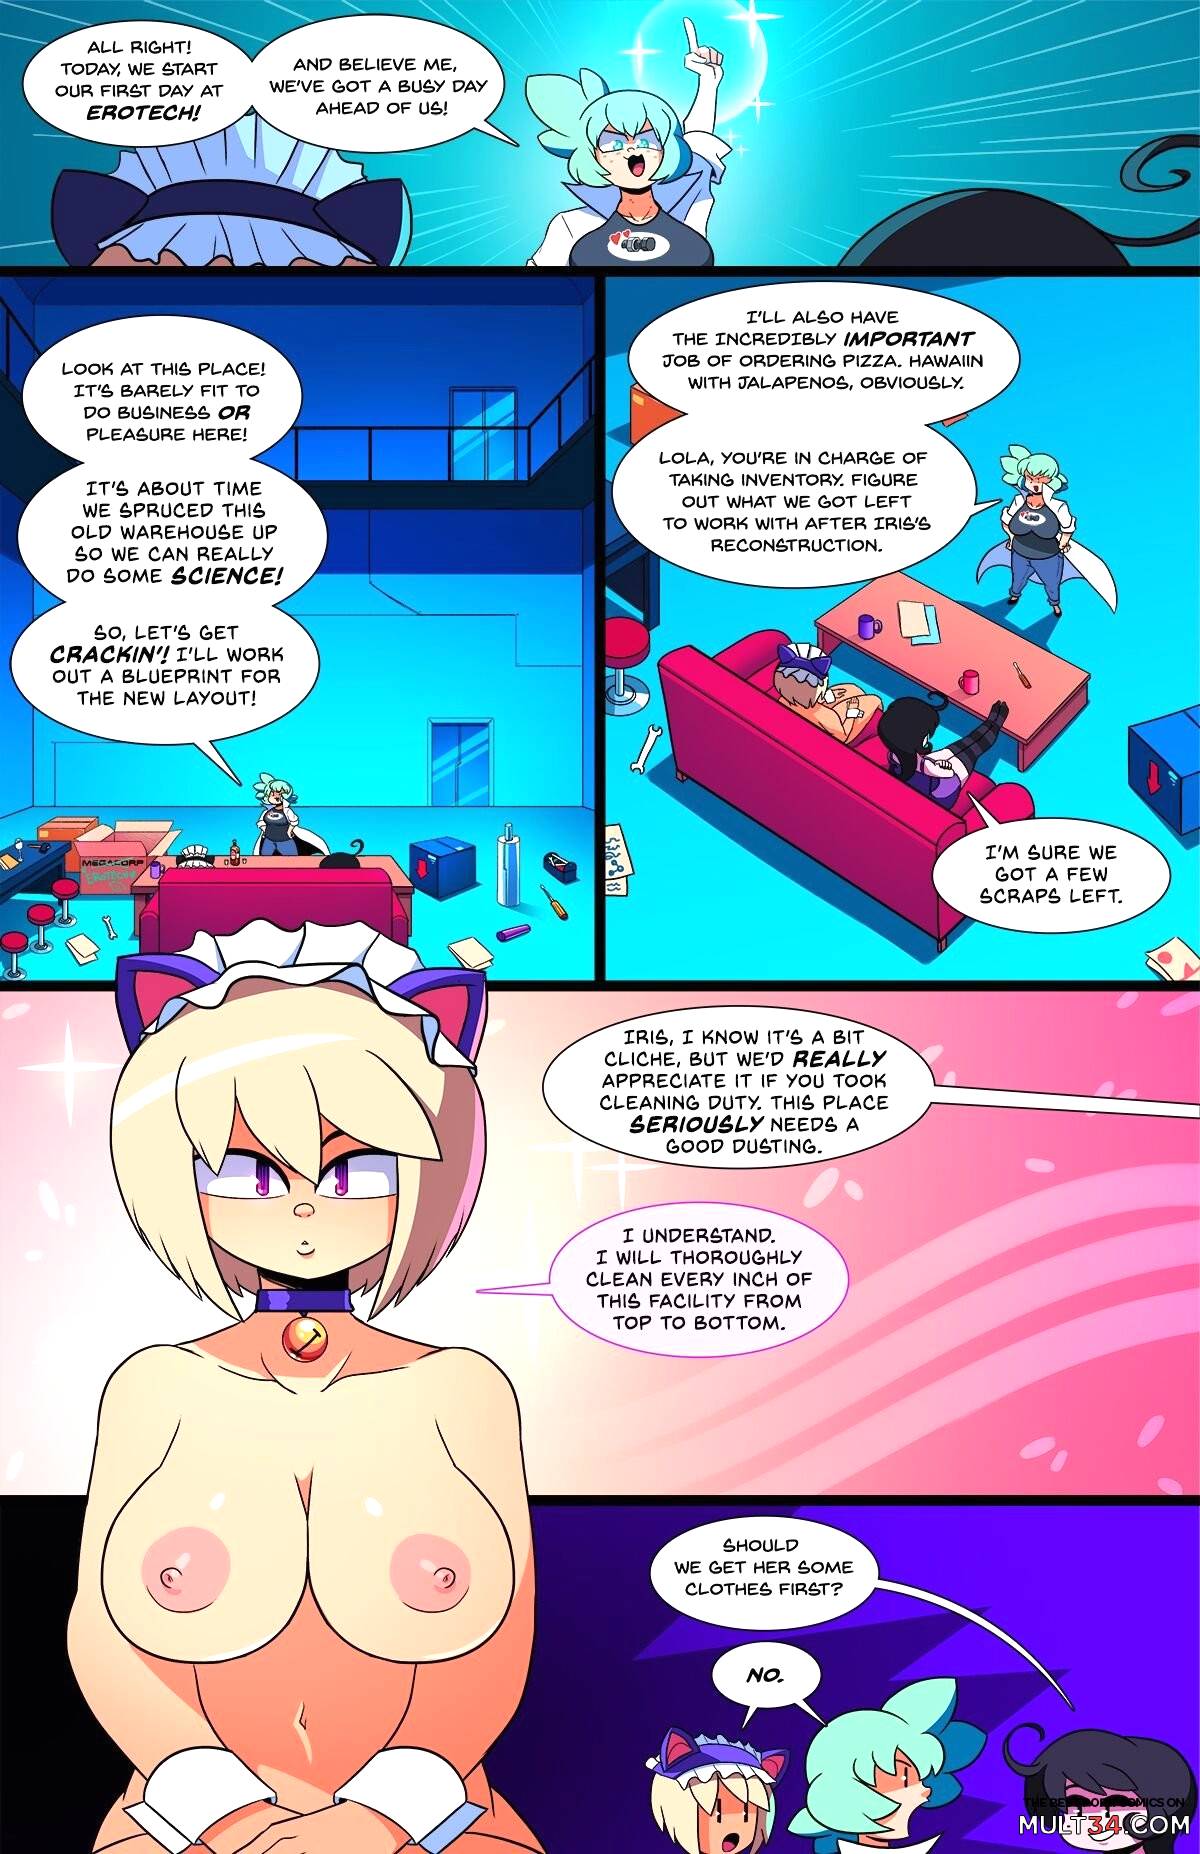 Erotech - Chapter 2 page 10